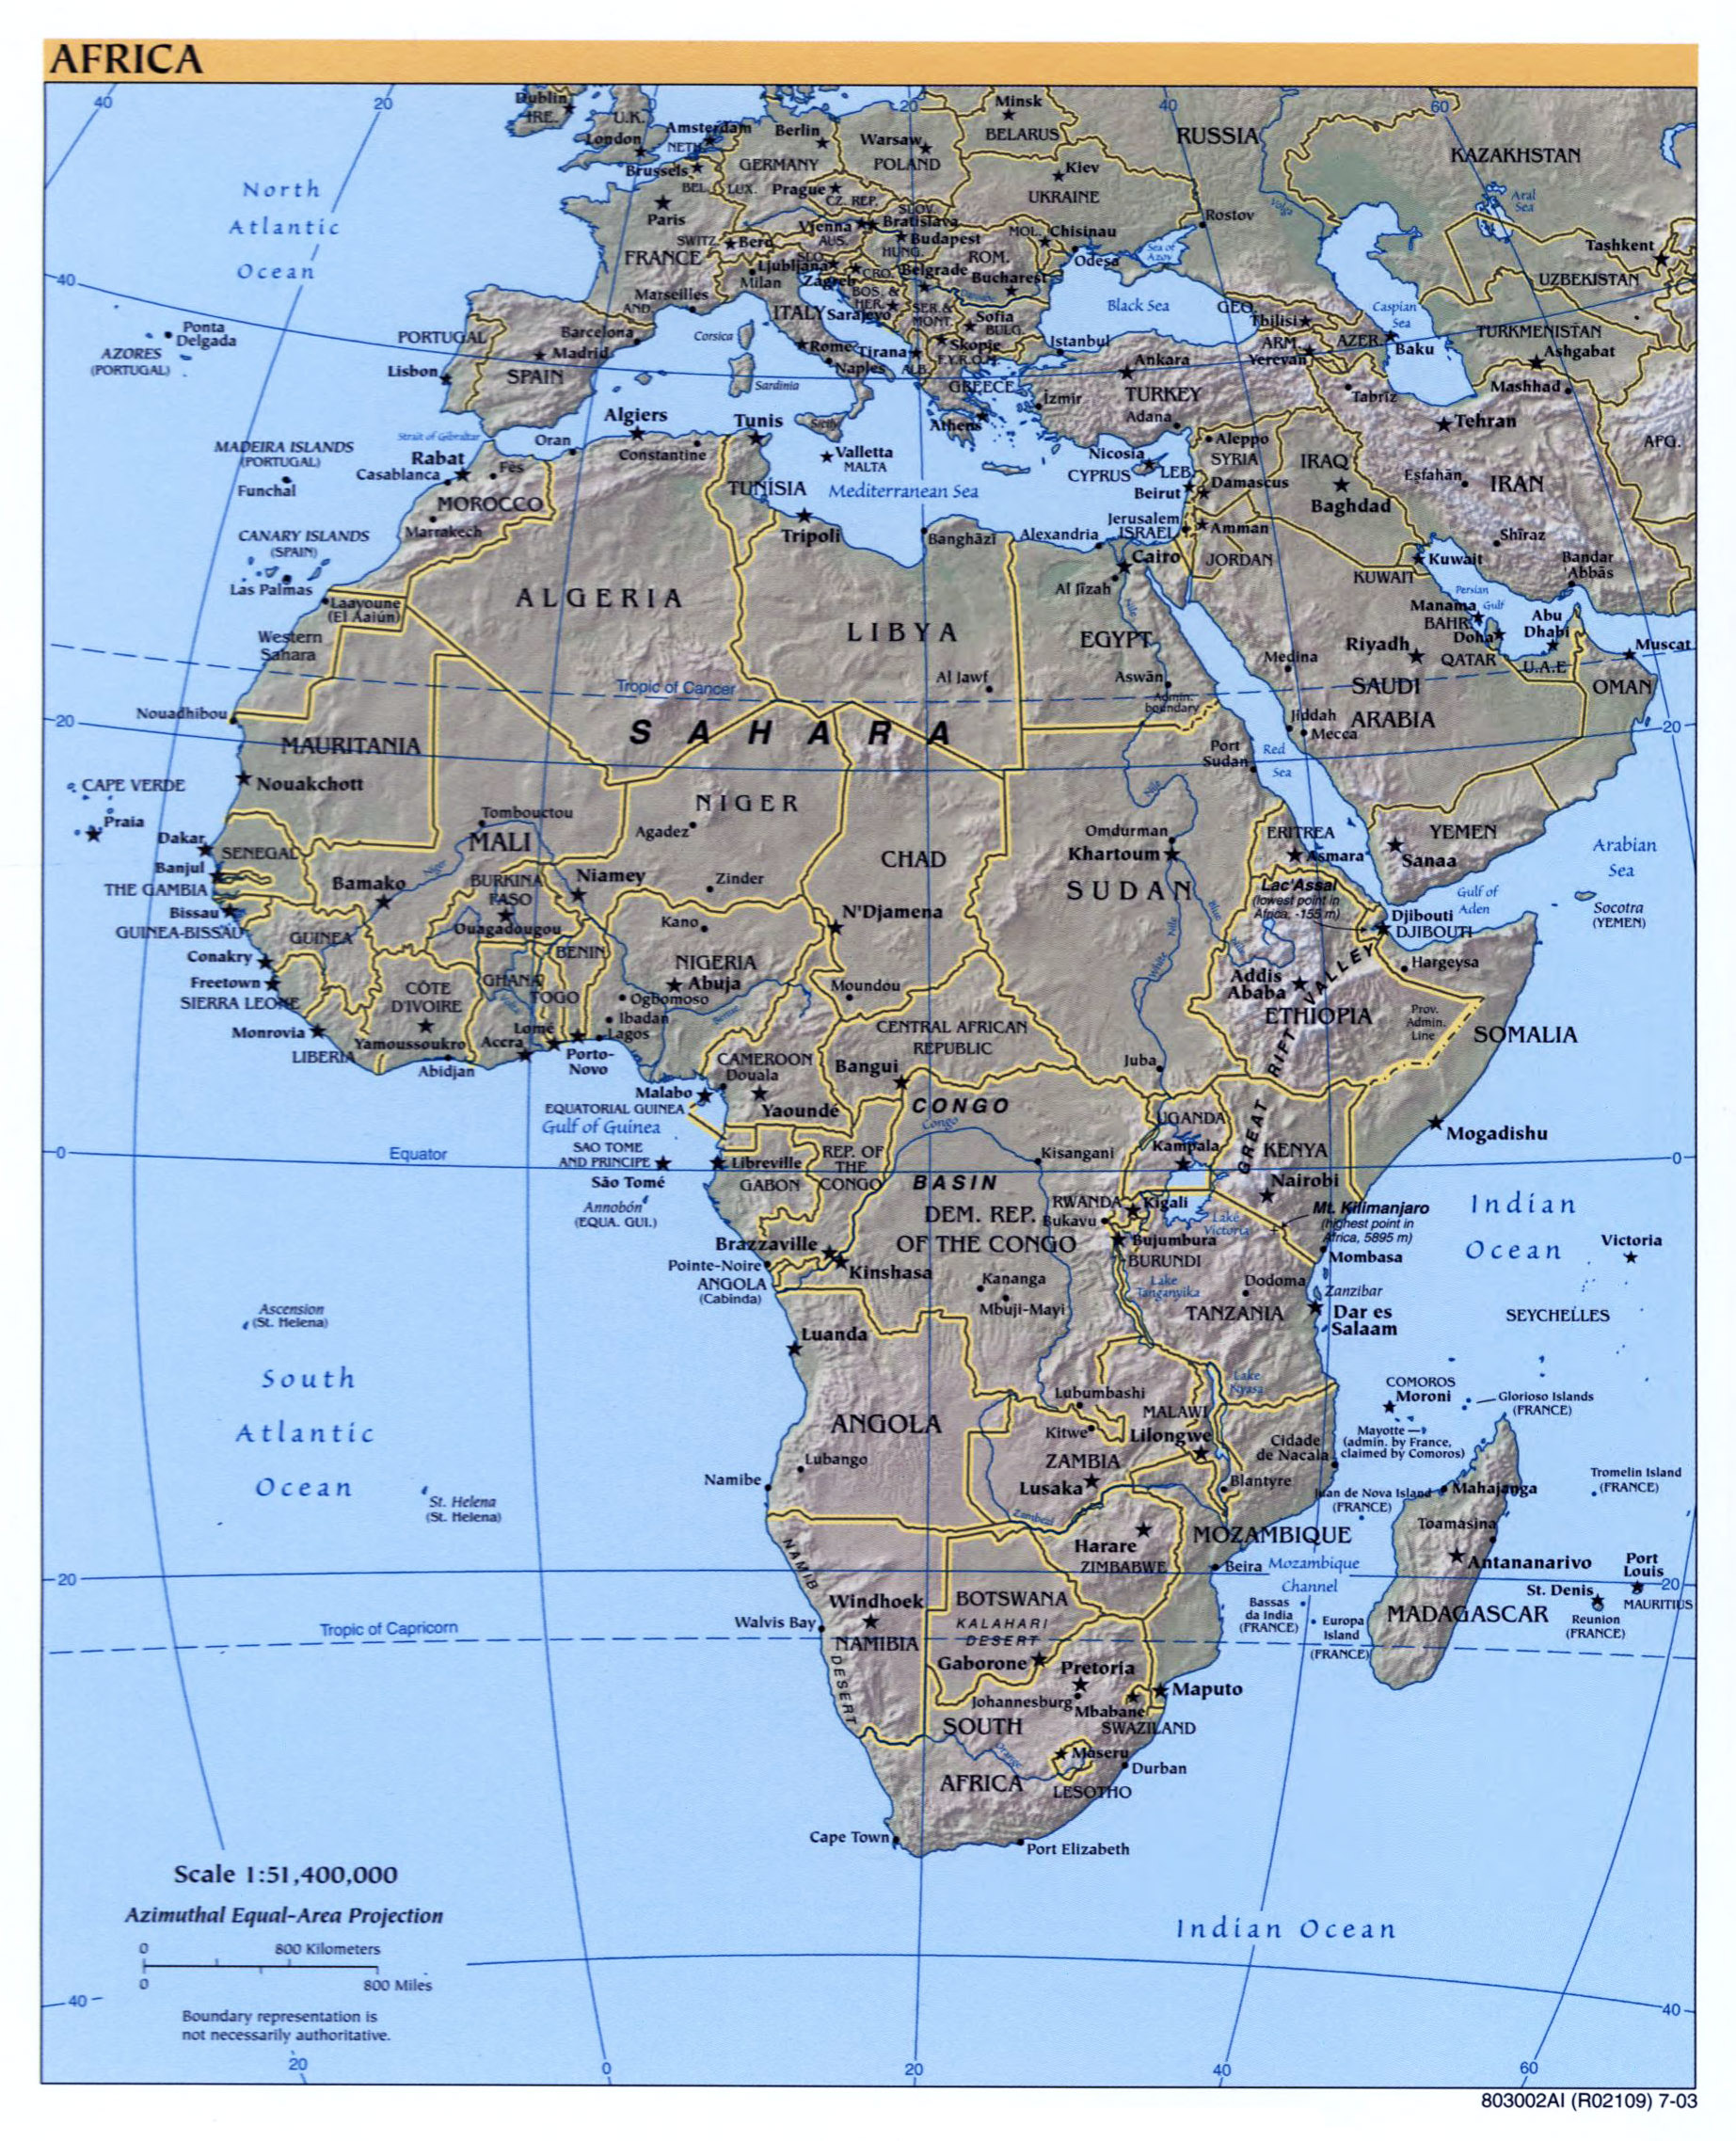 large-detailed-political-map-of-africa-with-relief-capitals-and-major-cities-2003-vidiani